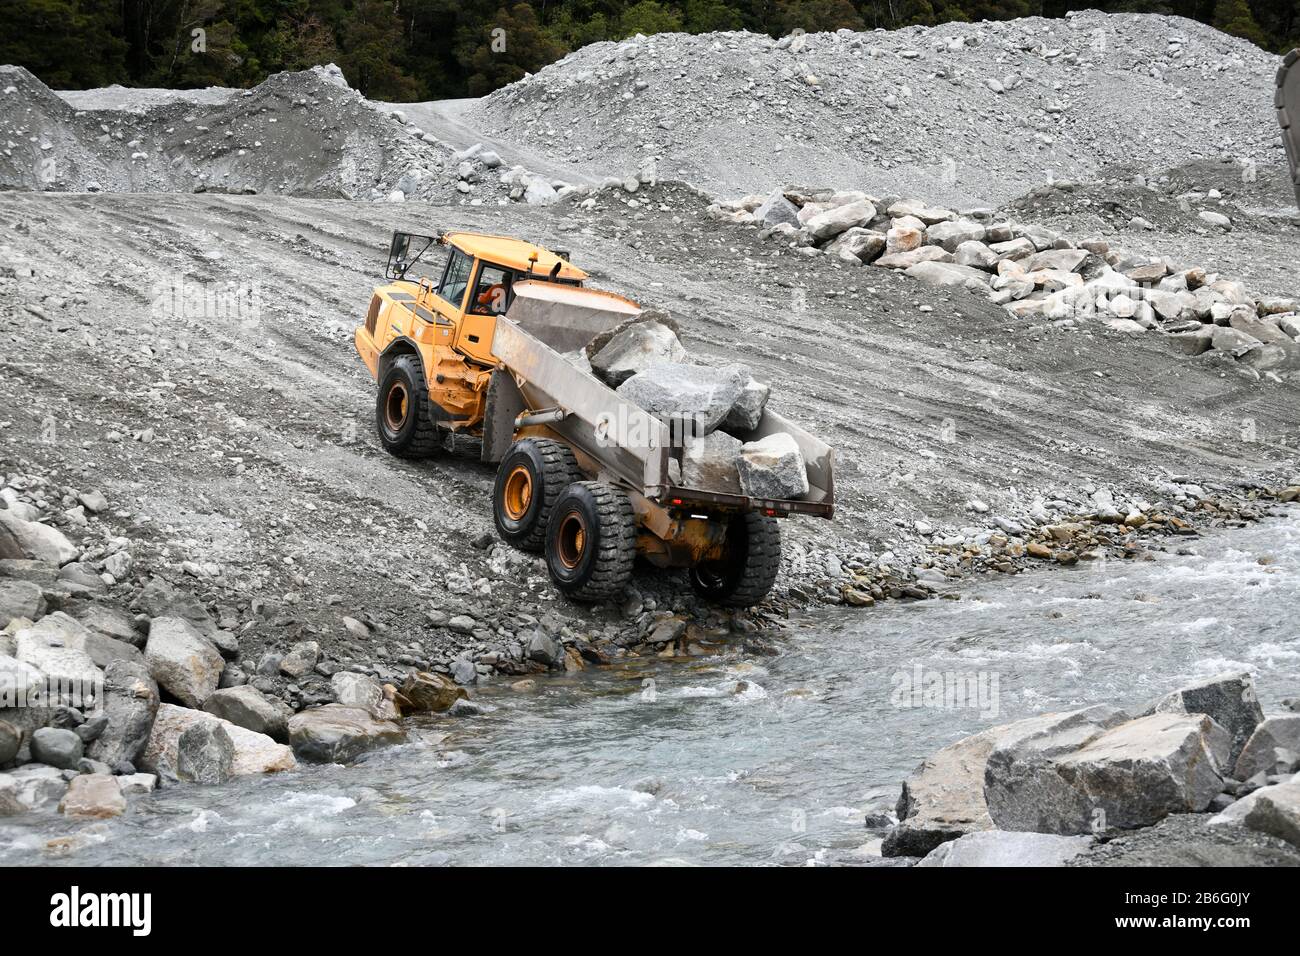 OTIRA, NEW ZEALAND, SEPTEMBER 19, 2019: A tip truck dumps a load of rock to create flood water control on a West Coast river just above a railway brid Stock Photo